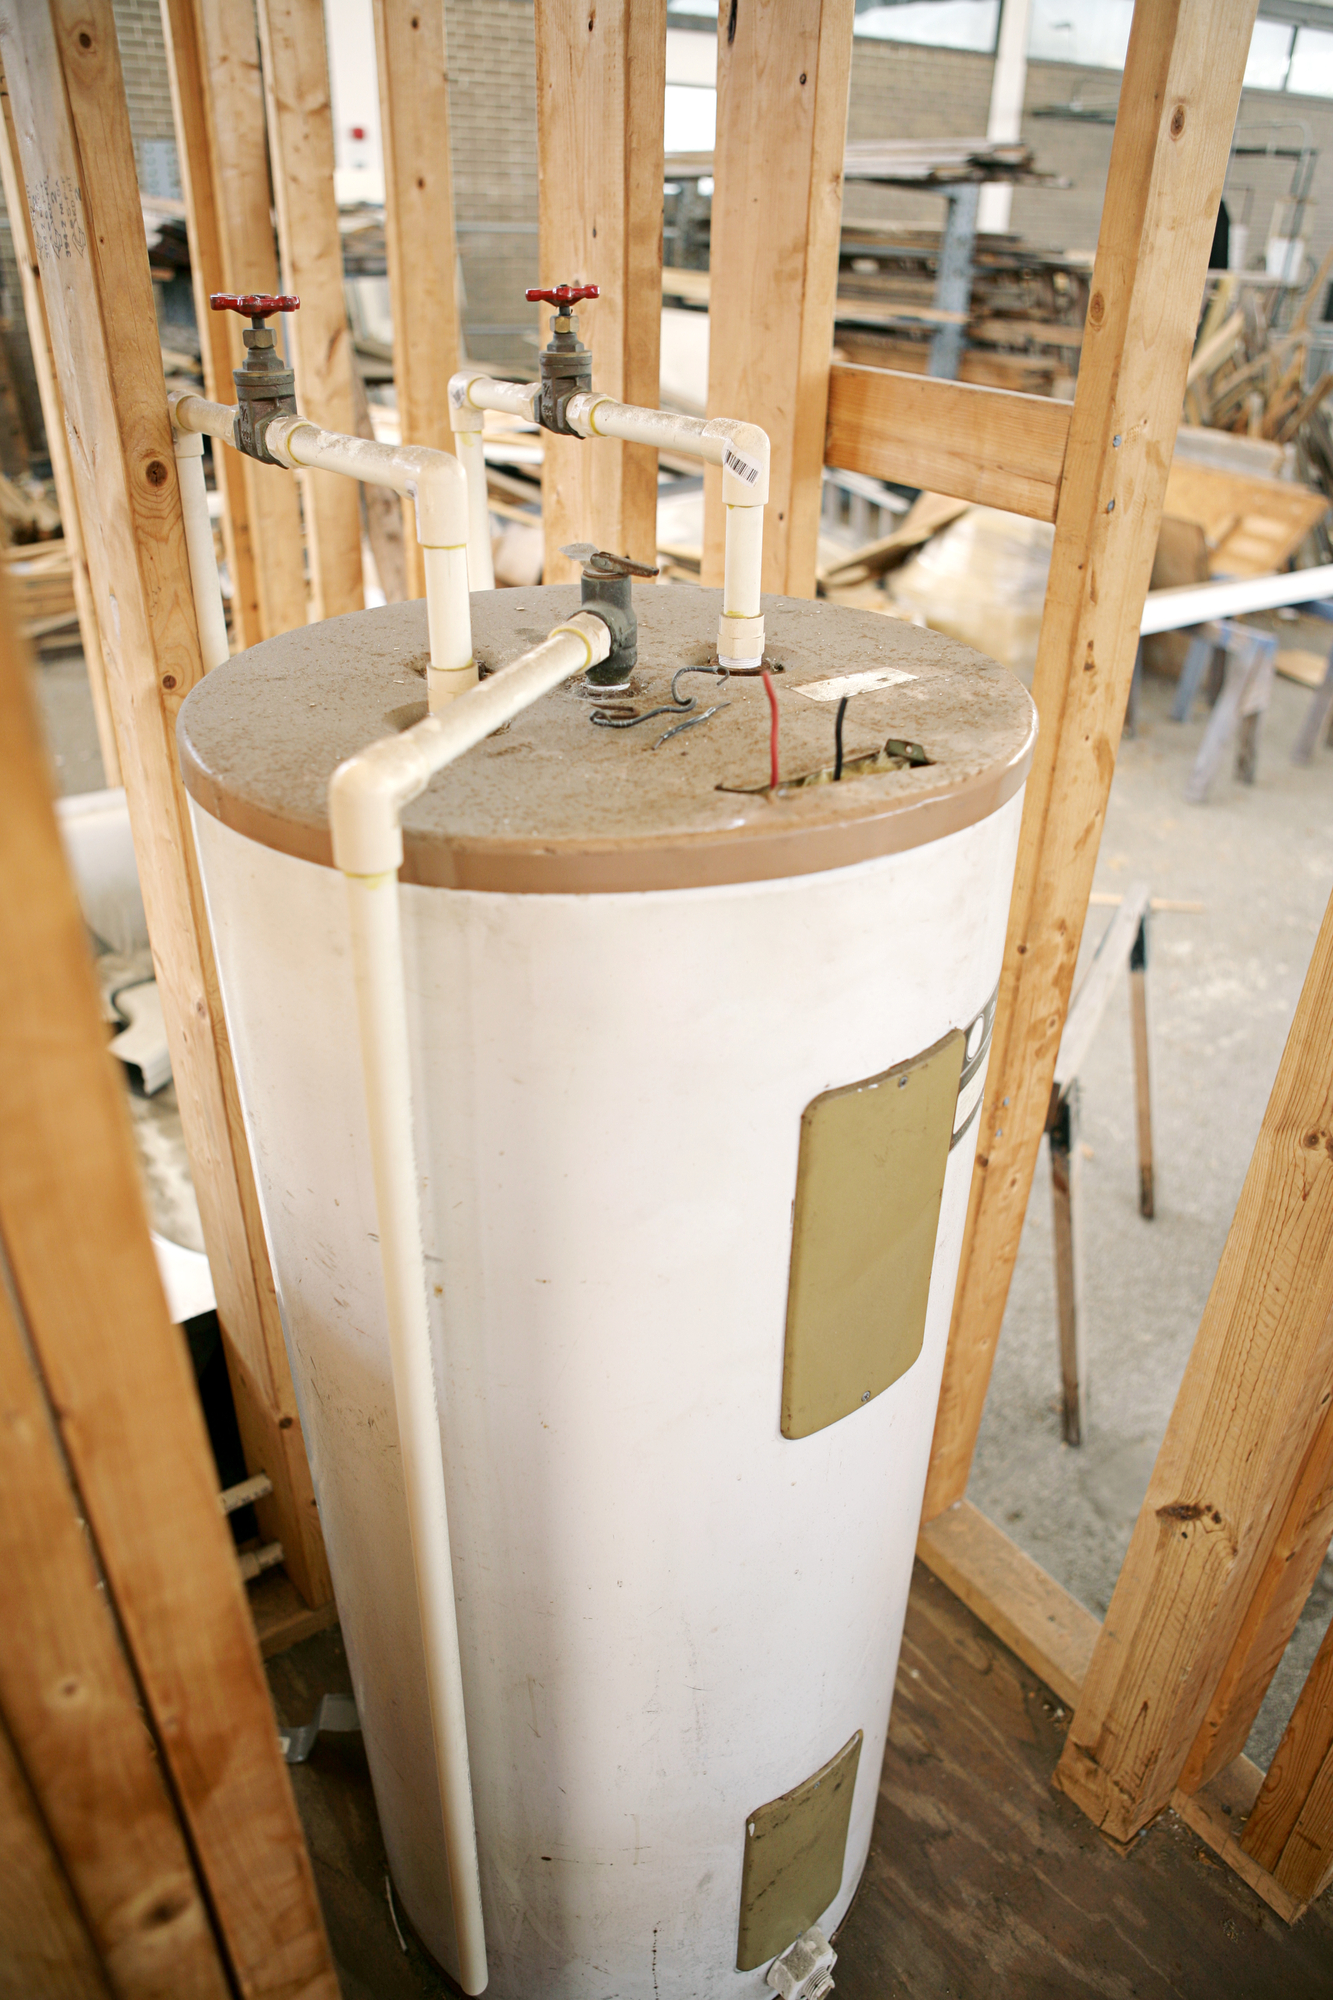 Construction site with hot water heater installed. Focus on center top of water heater.